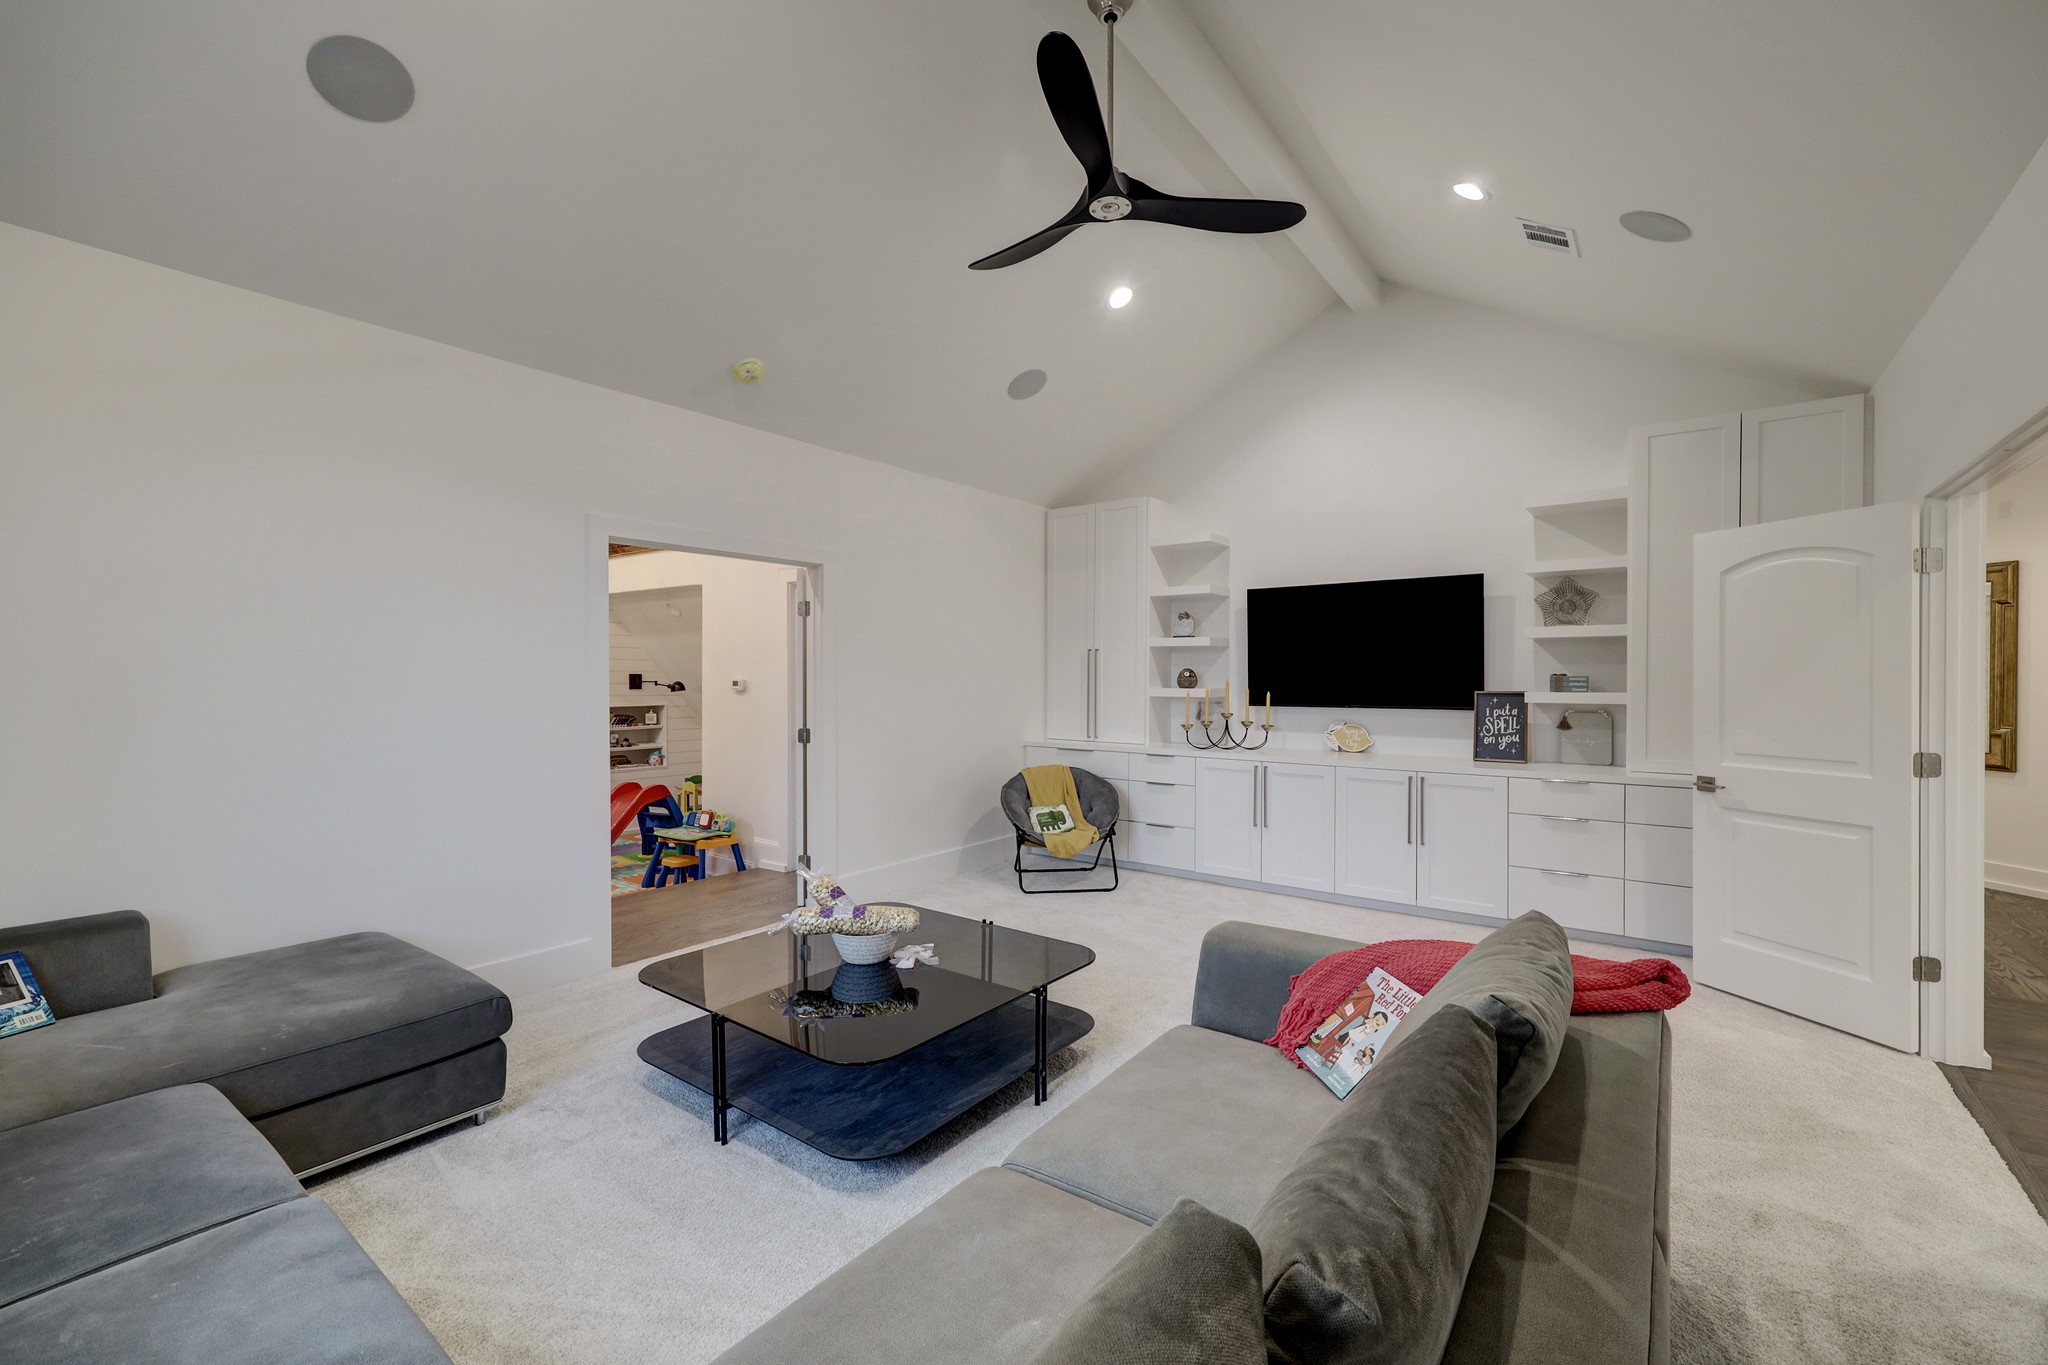 Fantastic game room for quality family time features plenty of built ins for games and more.